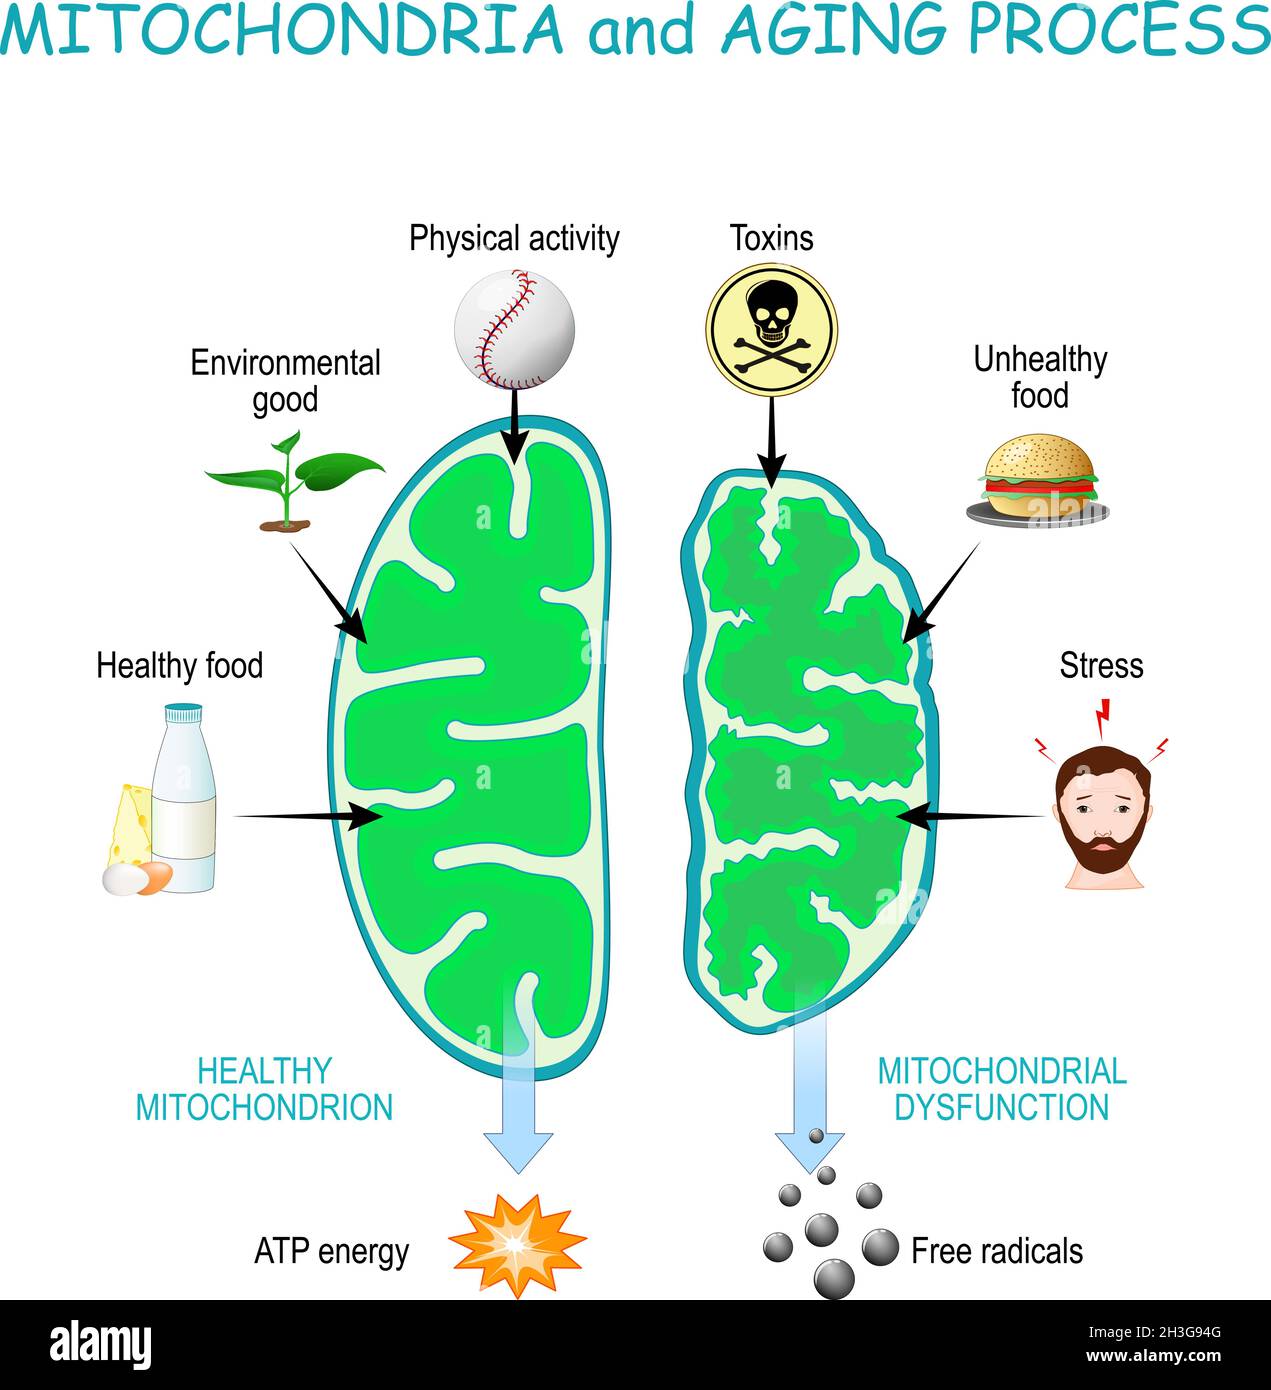 Mitochondria and aging process. Healthy Mitochondrion are produce of Atp energy, cell organelles with Dysfunction produce of Free radicals. Stock Vector